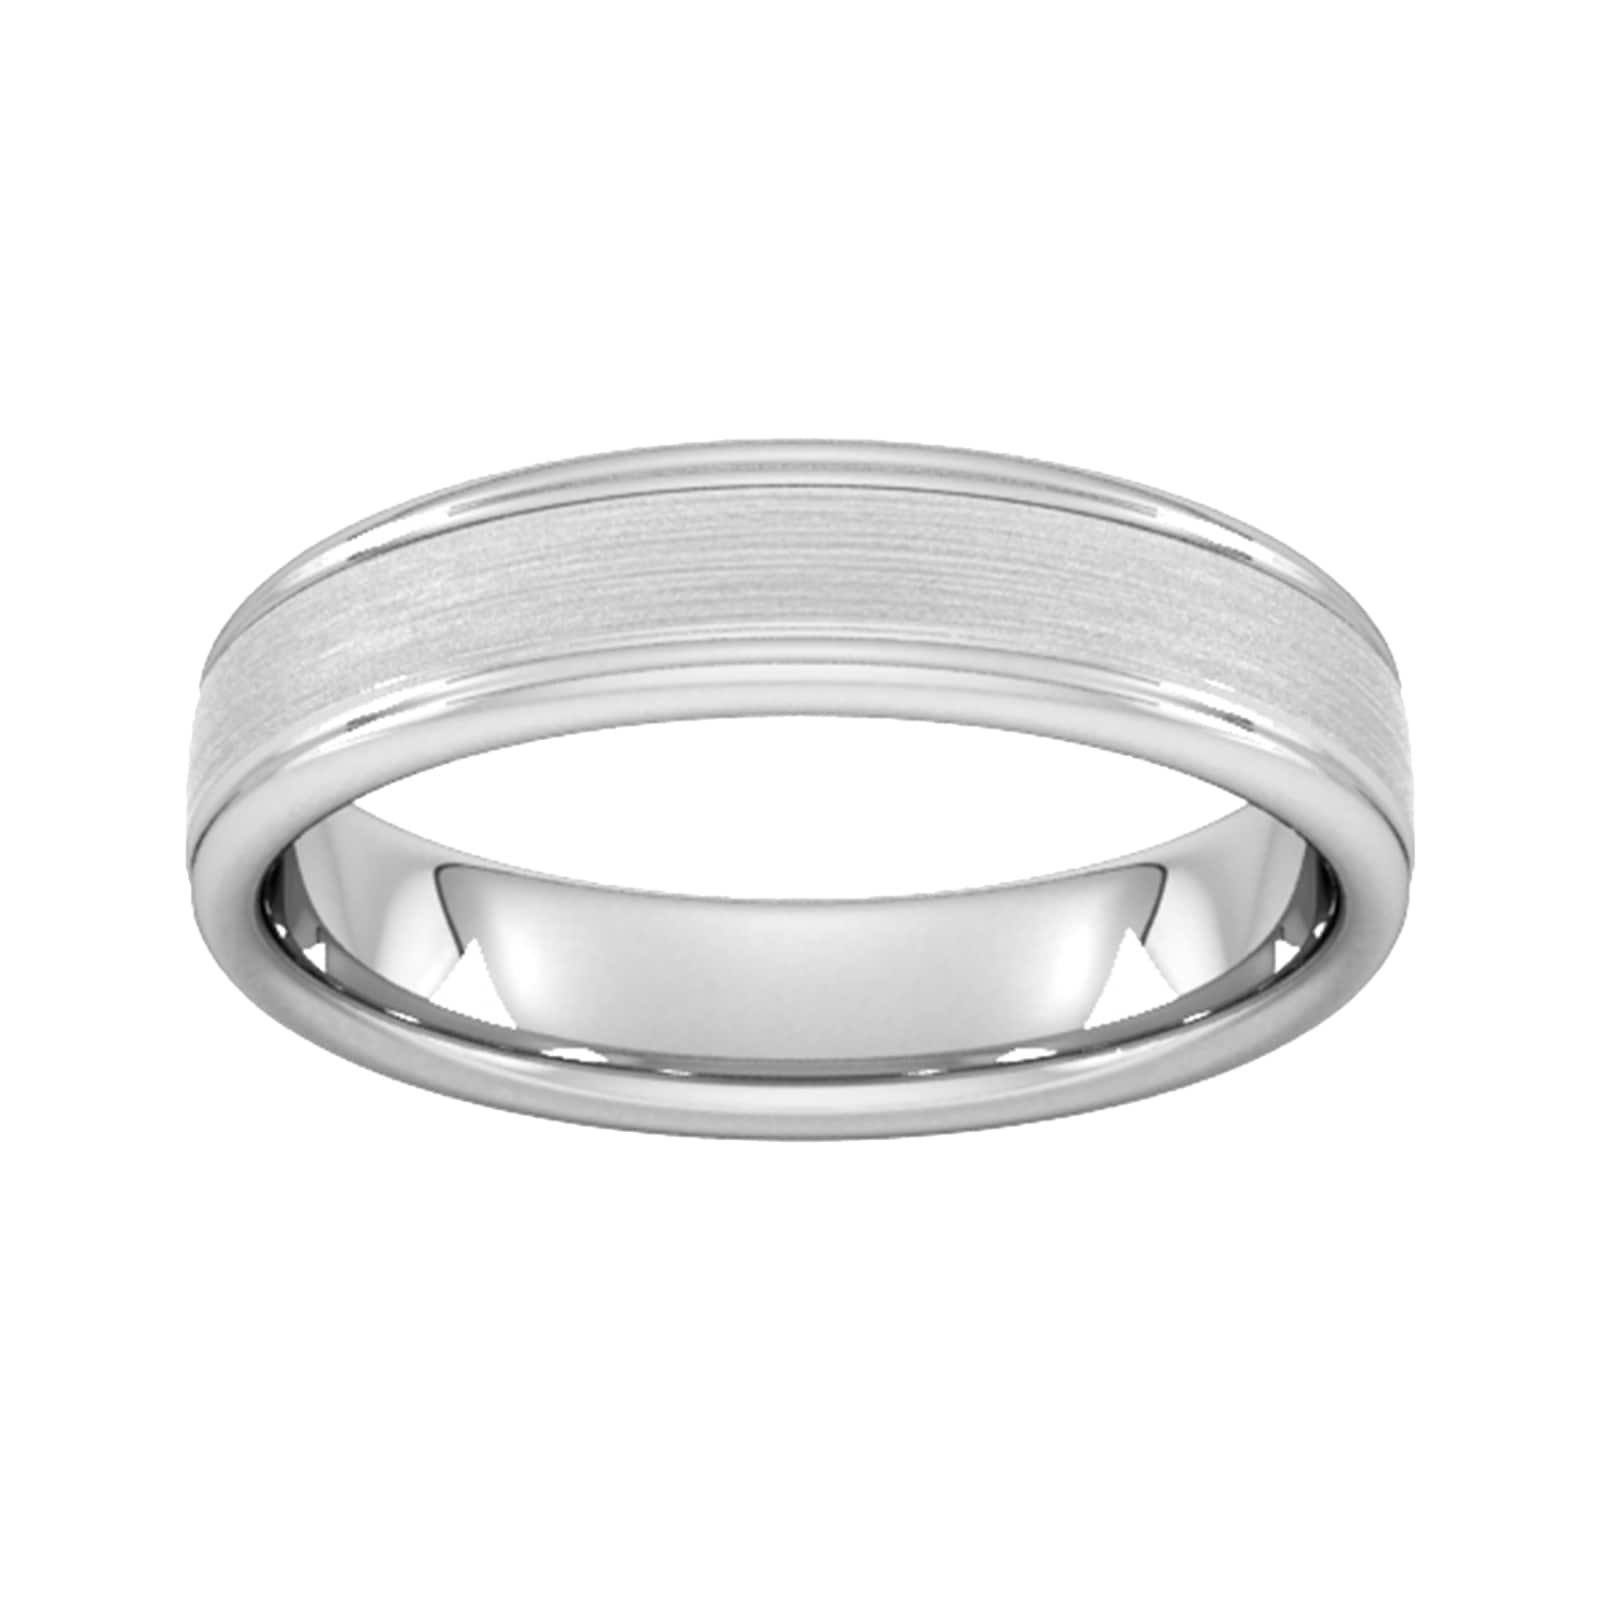 5mm D Shape Heavy Matt Centre With Grooves Wedding Ring In 18 Carat White Gold - Ring Size P